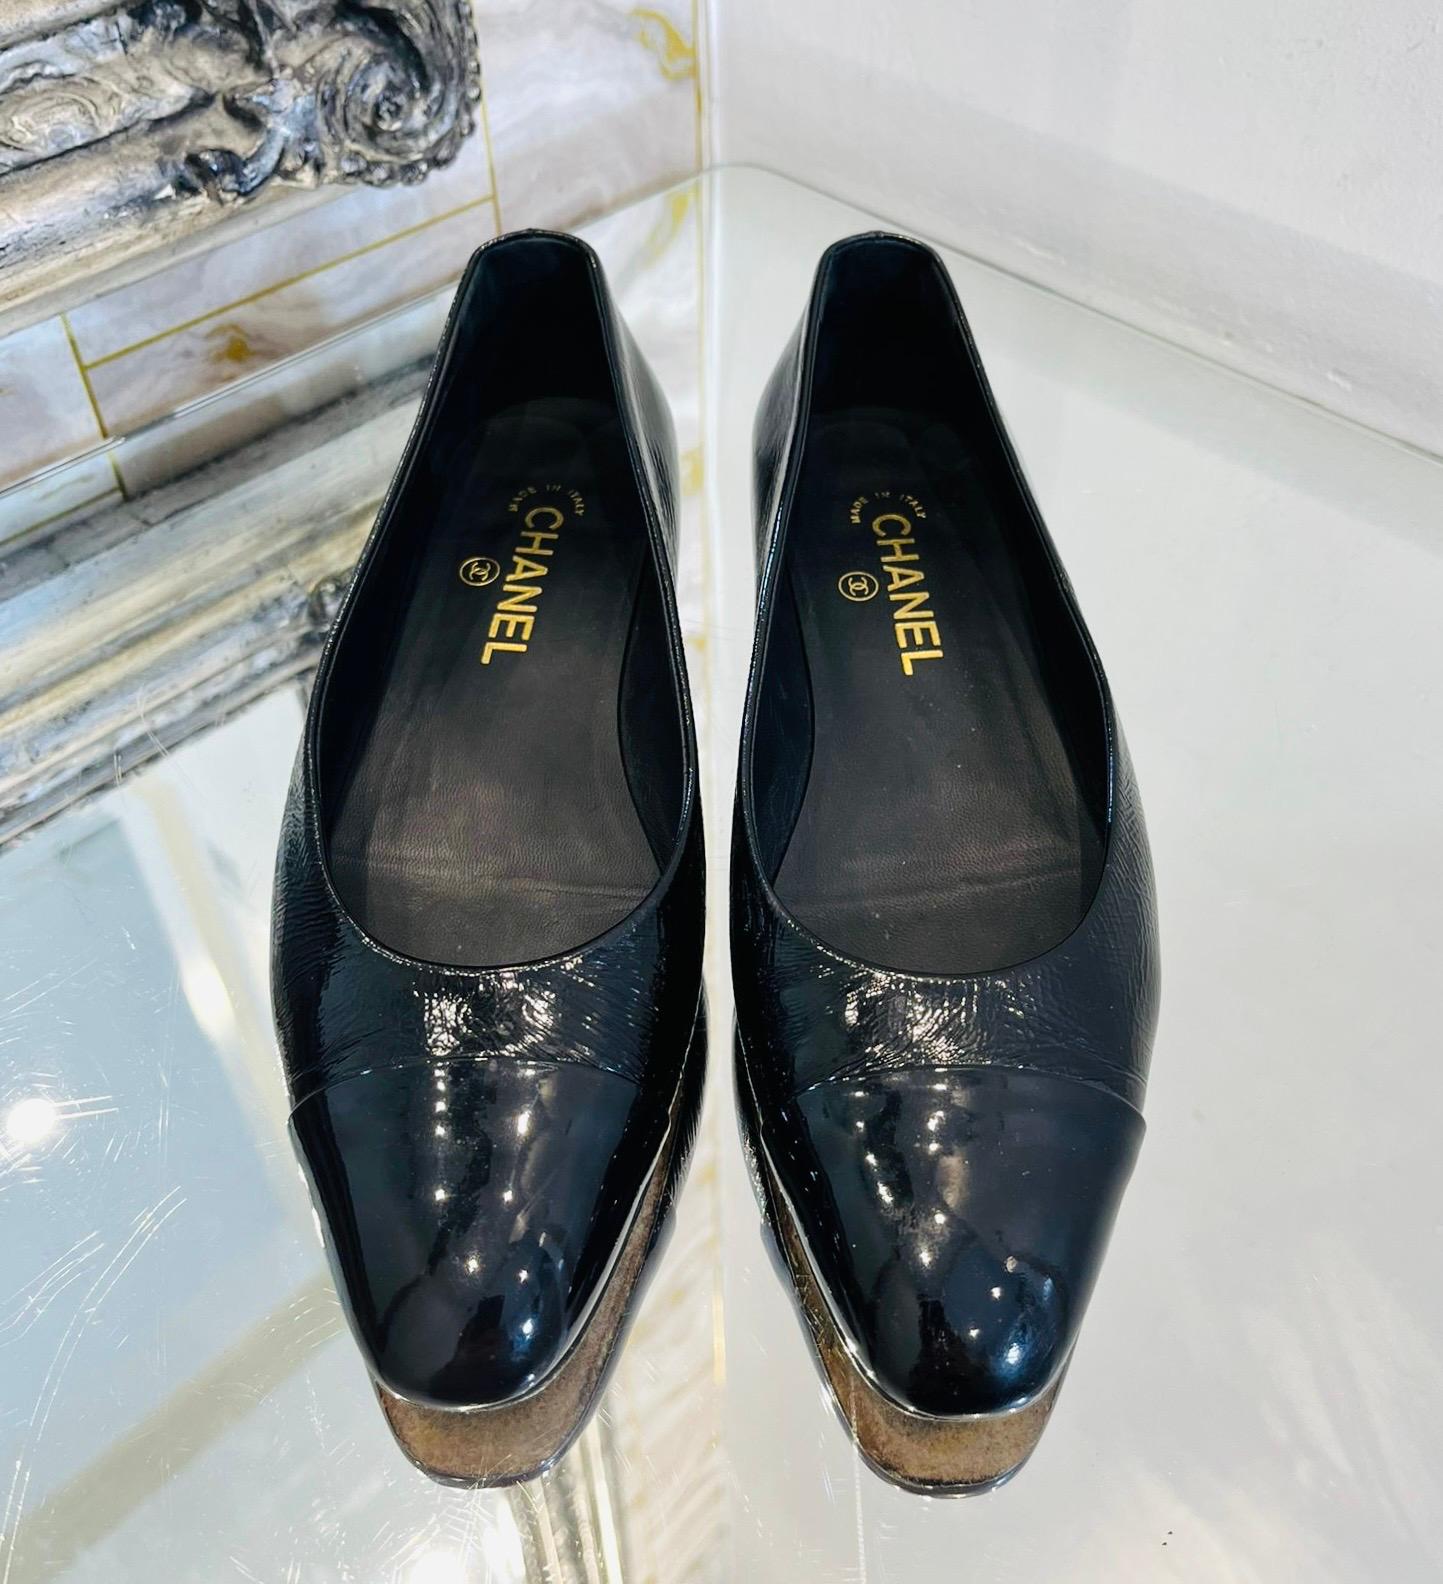 Chanel 'CC' Logo Patent Leather Flats

Crinkled leather effect black flats designed with shiny patent leather cap toes.

Detailed with low heel embellished with gold 'CC' logo to the side.

Featuring leather interior and almond toe.

Size –